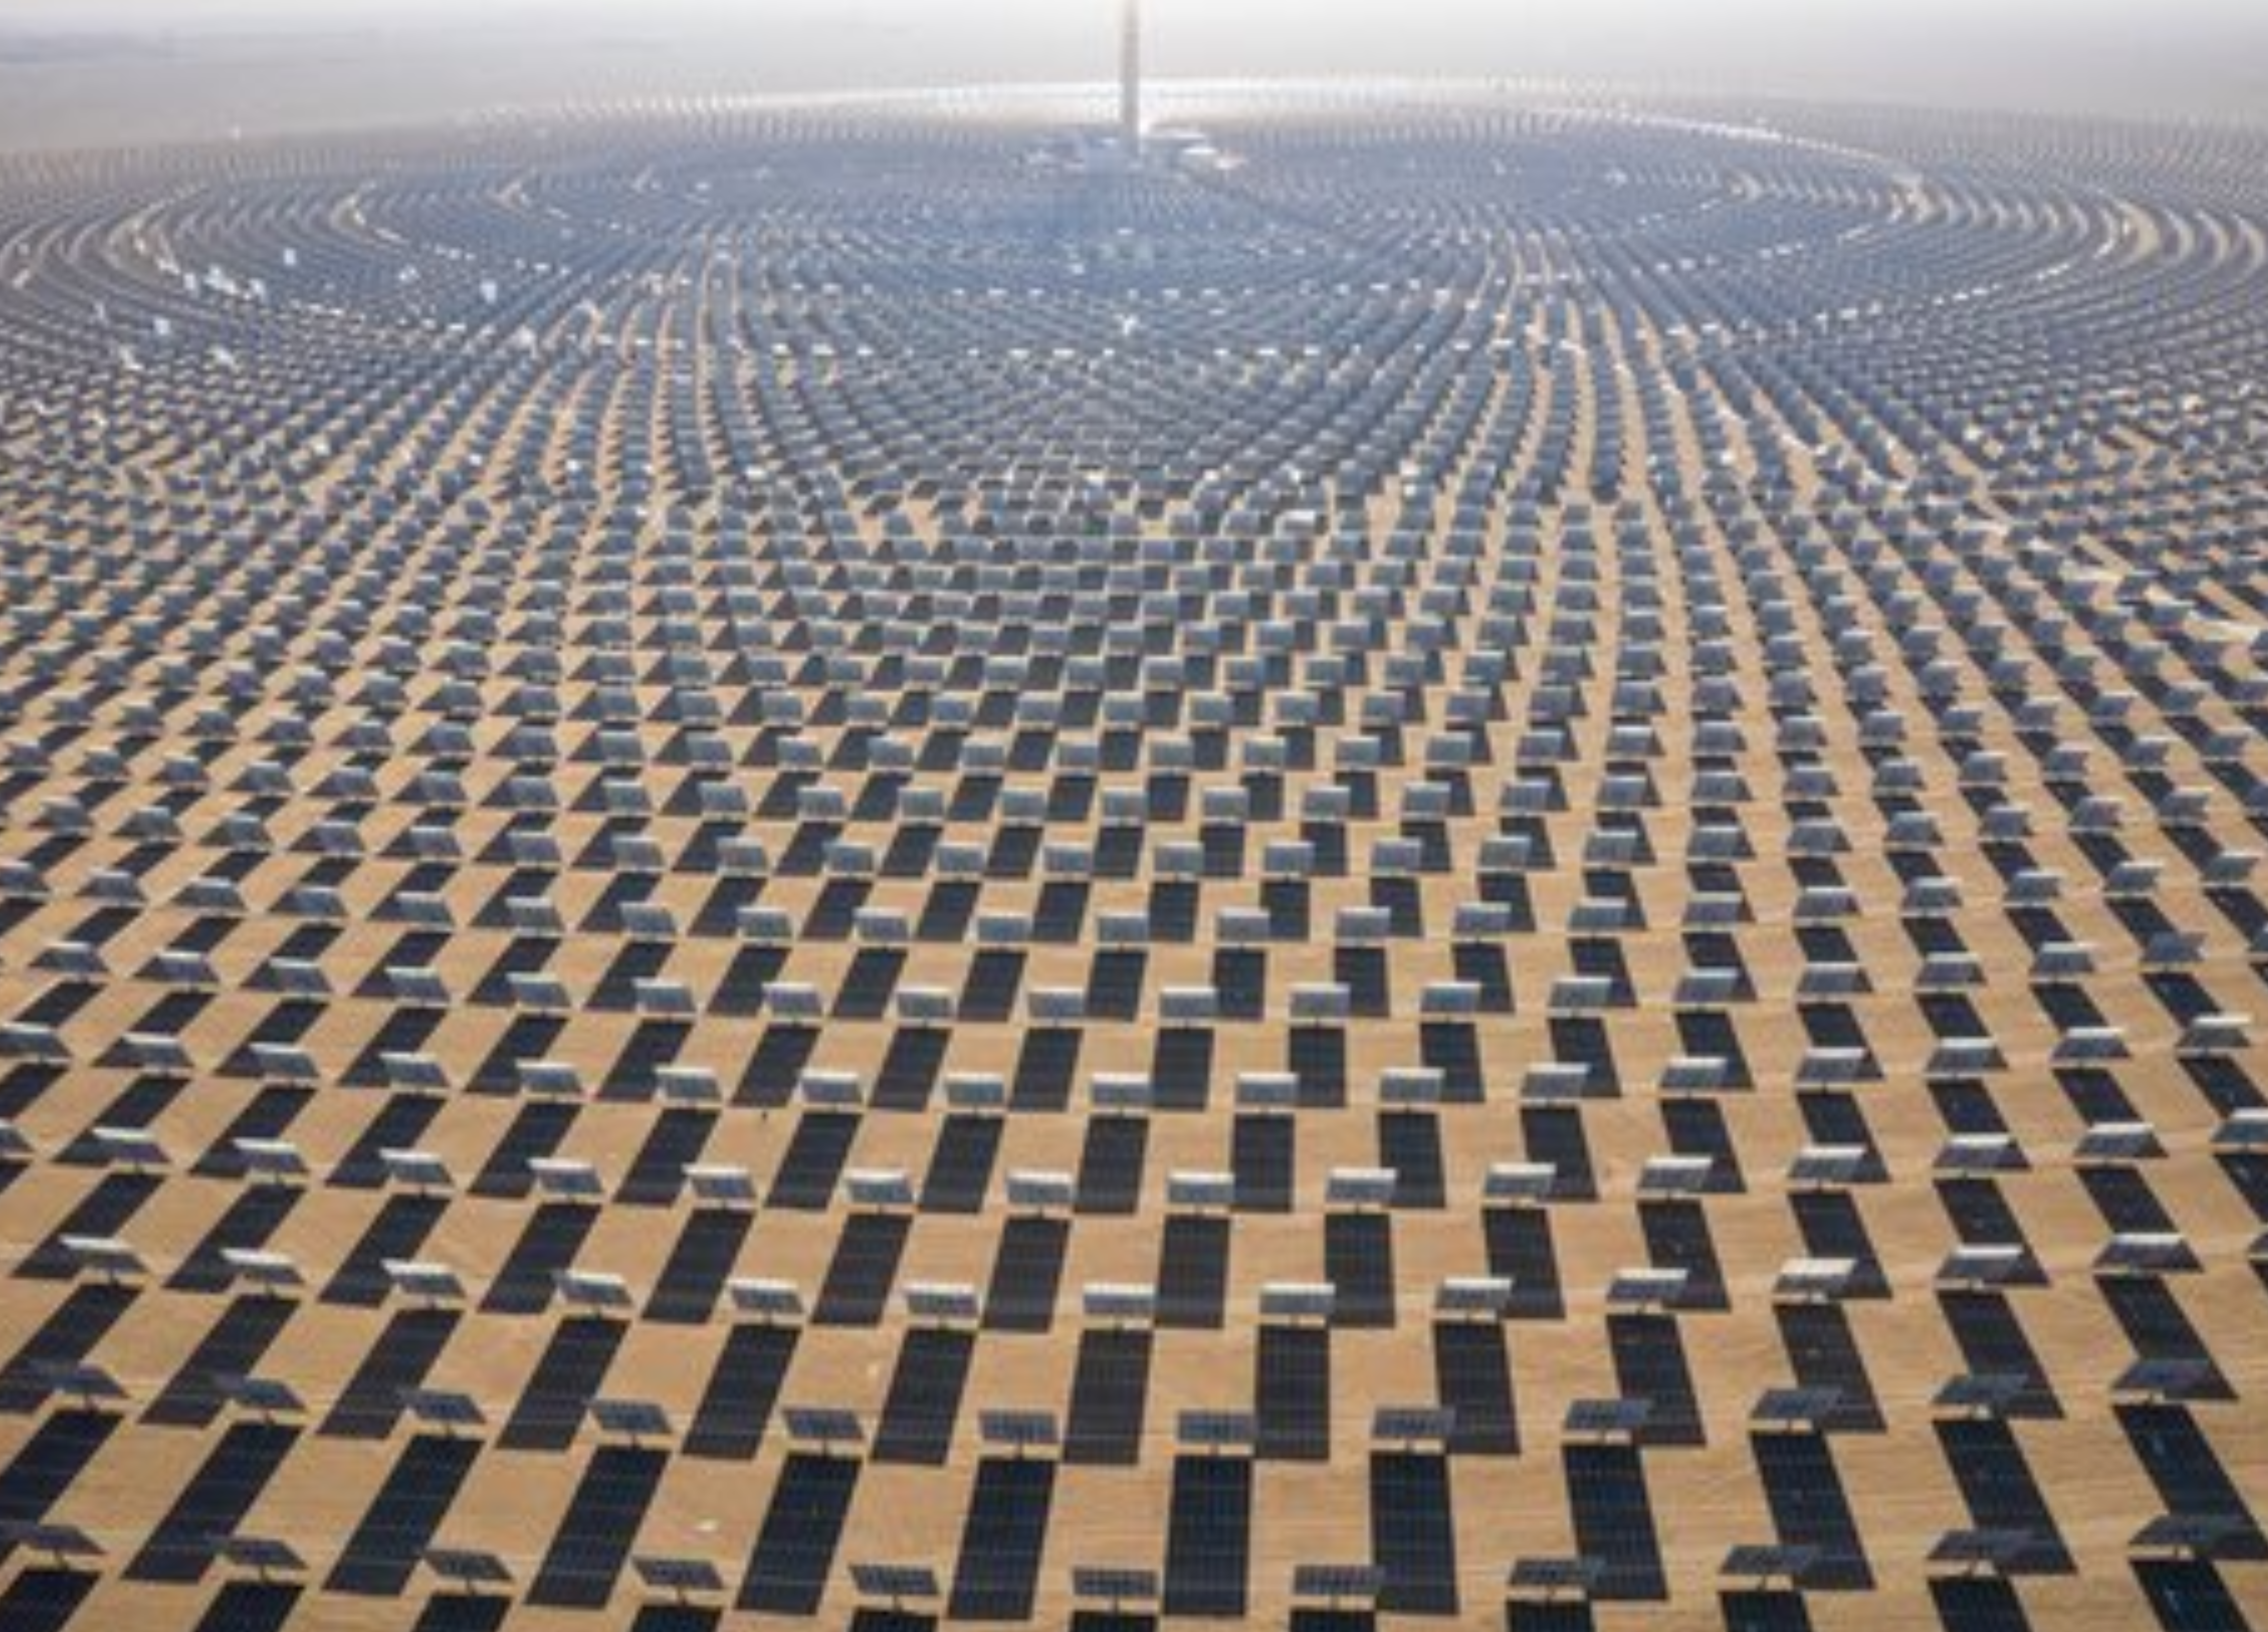 A large field of solar panels in the desert.